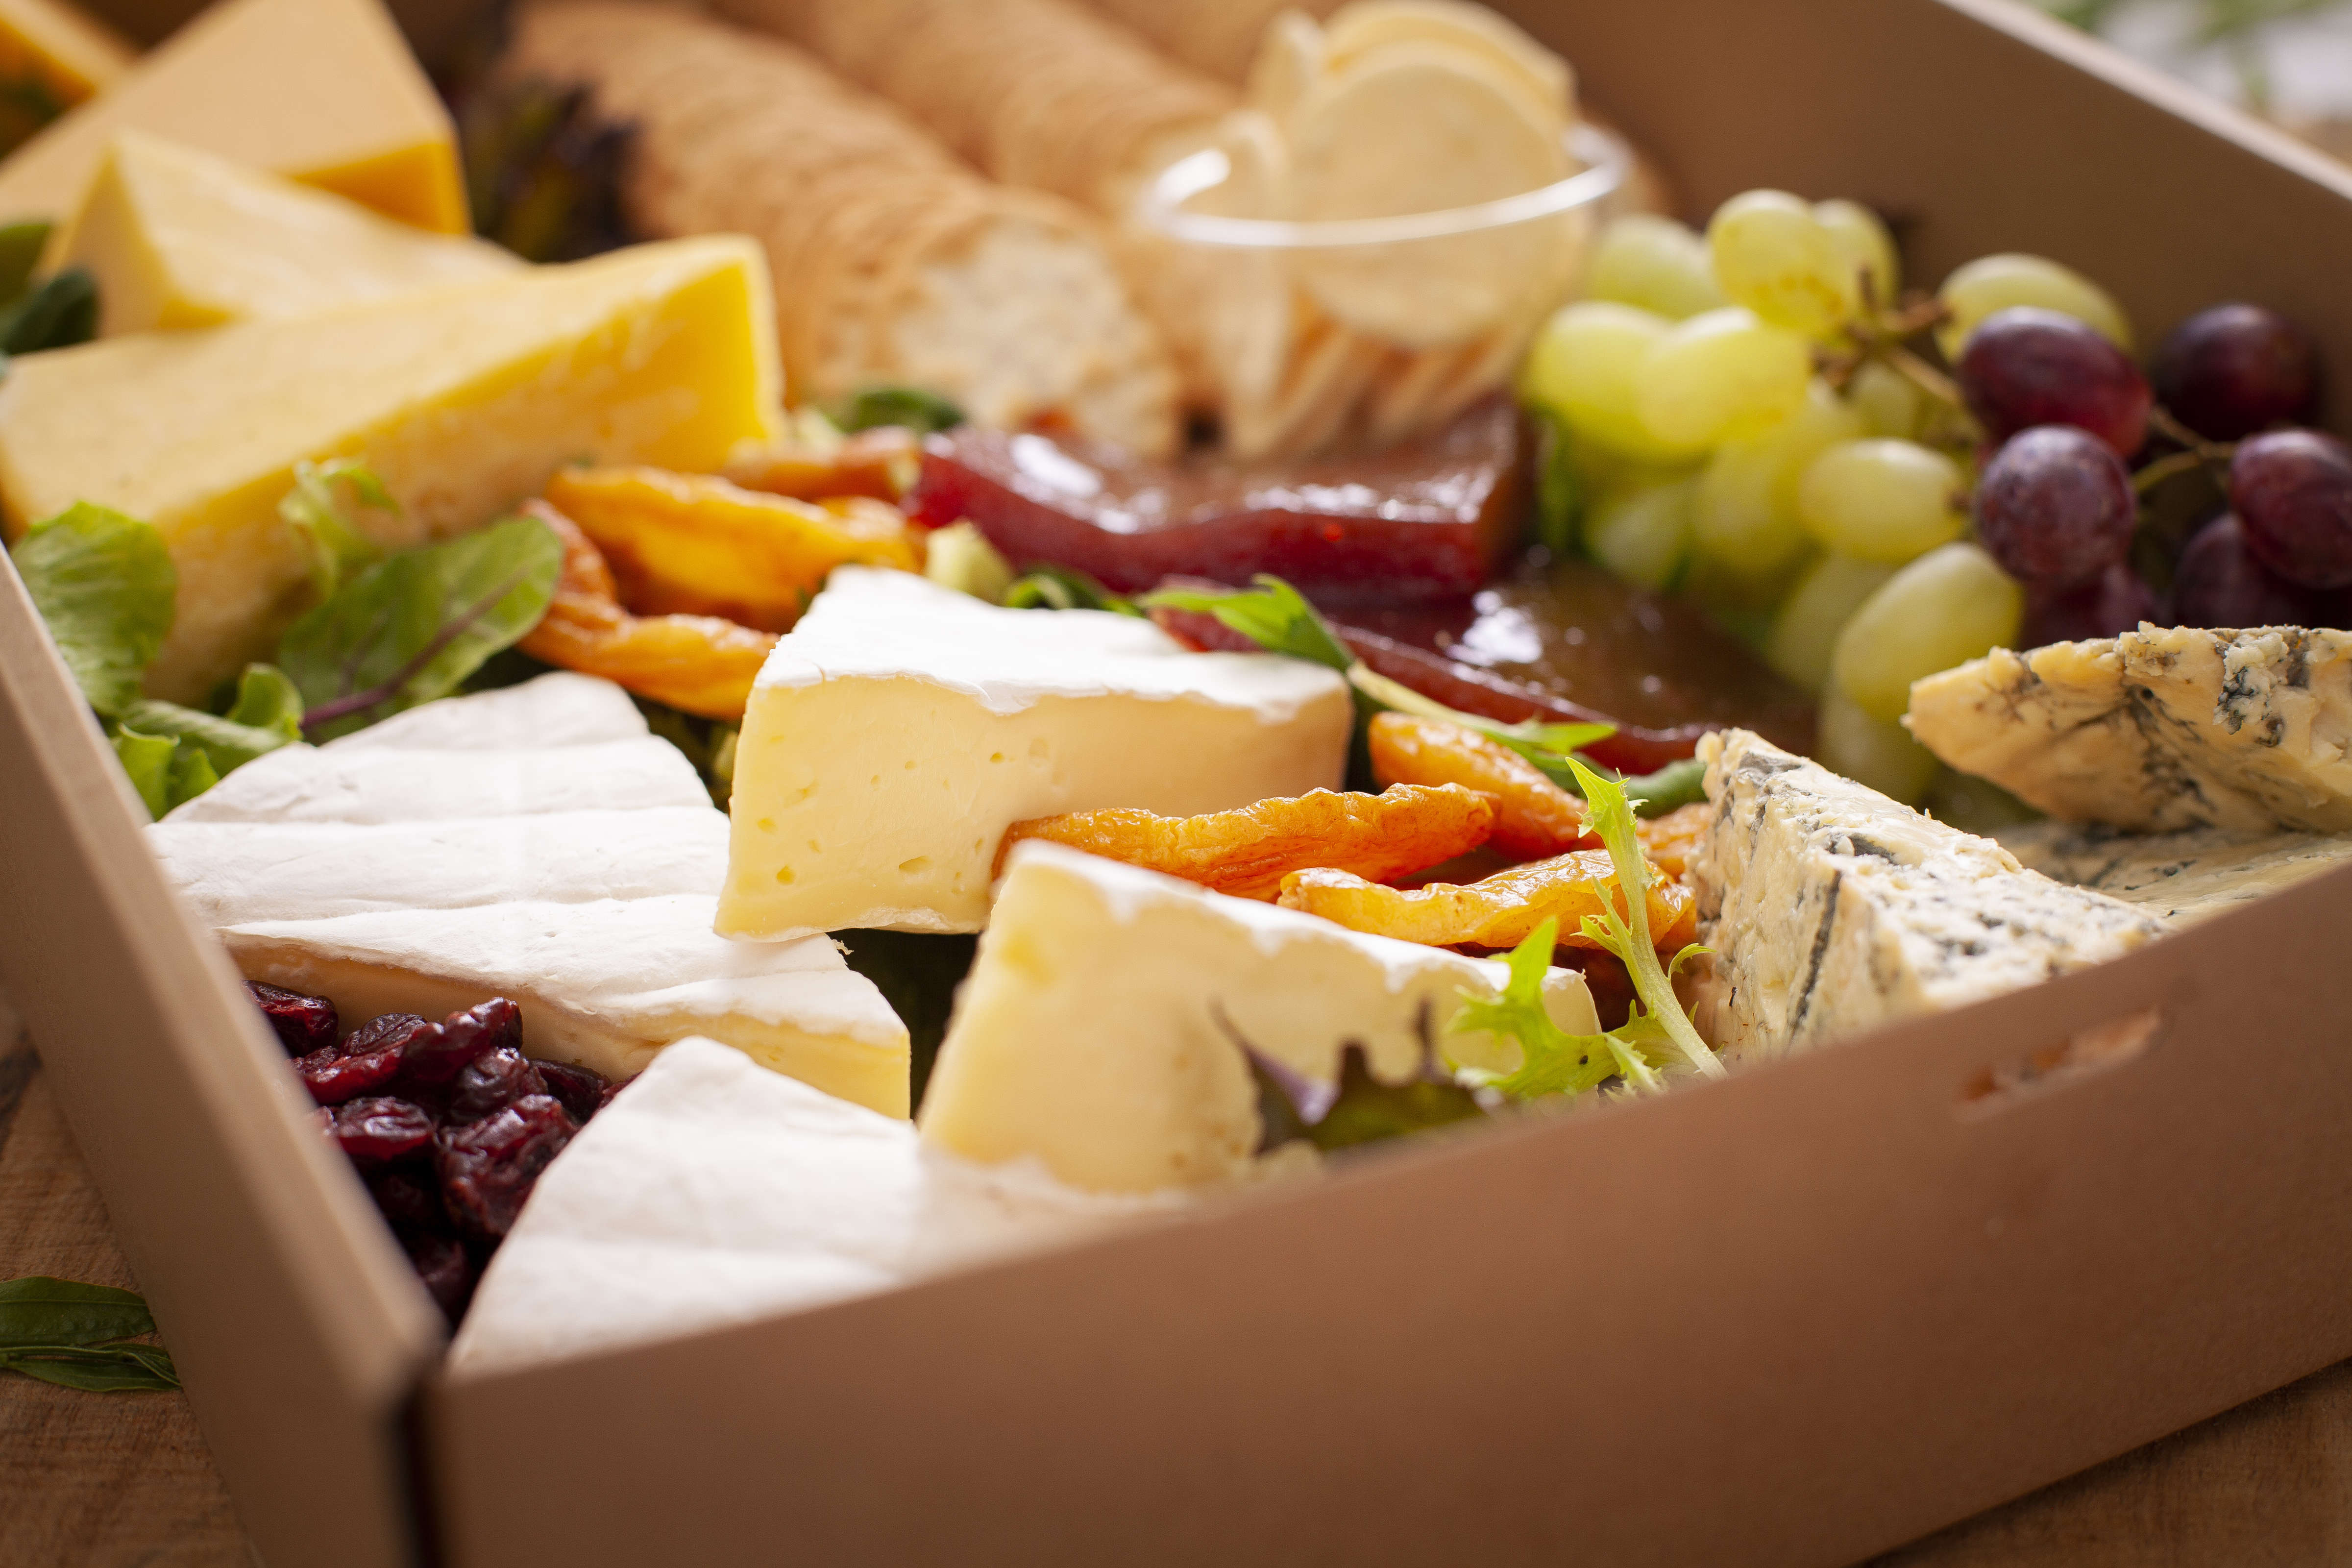 Tasmanian cheese box including Brie, Blue and Cheddar with quince paste and crackers. Photo: Richard Jupe.